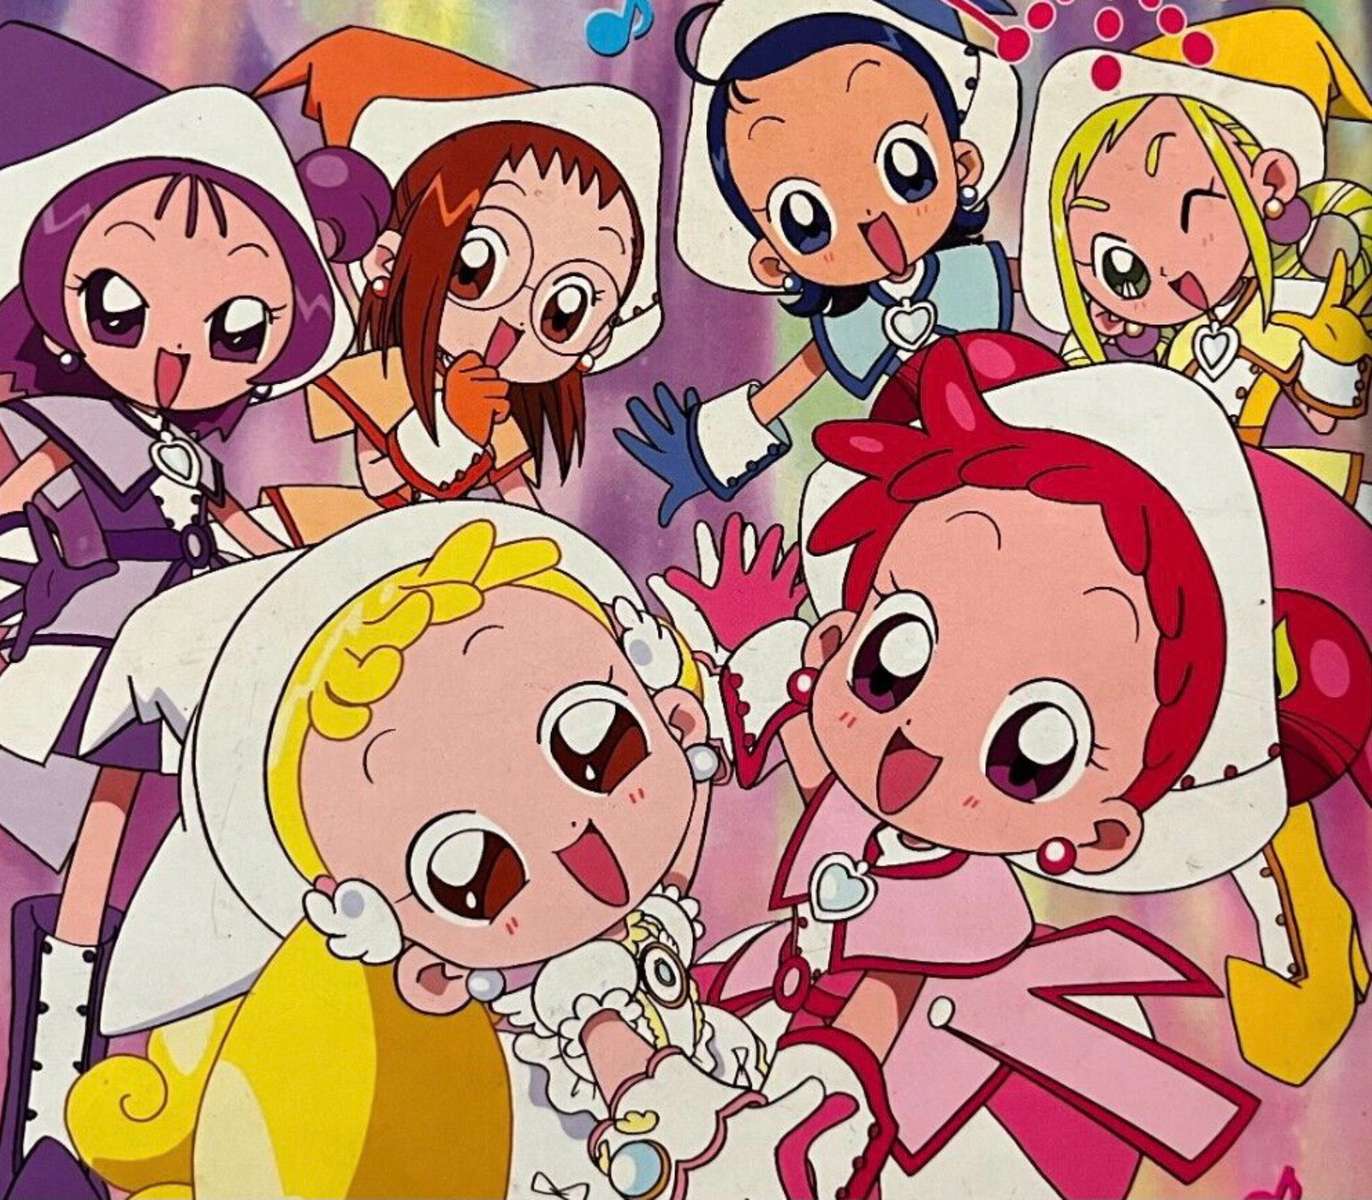 Ojamajos fofos! ❤️❤️❤️❤️❤️❤️ puzzle online